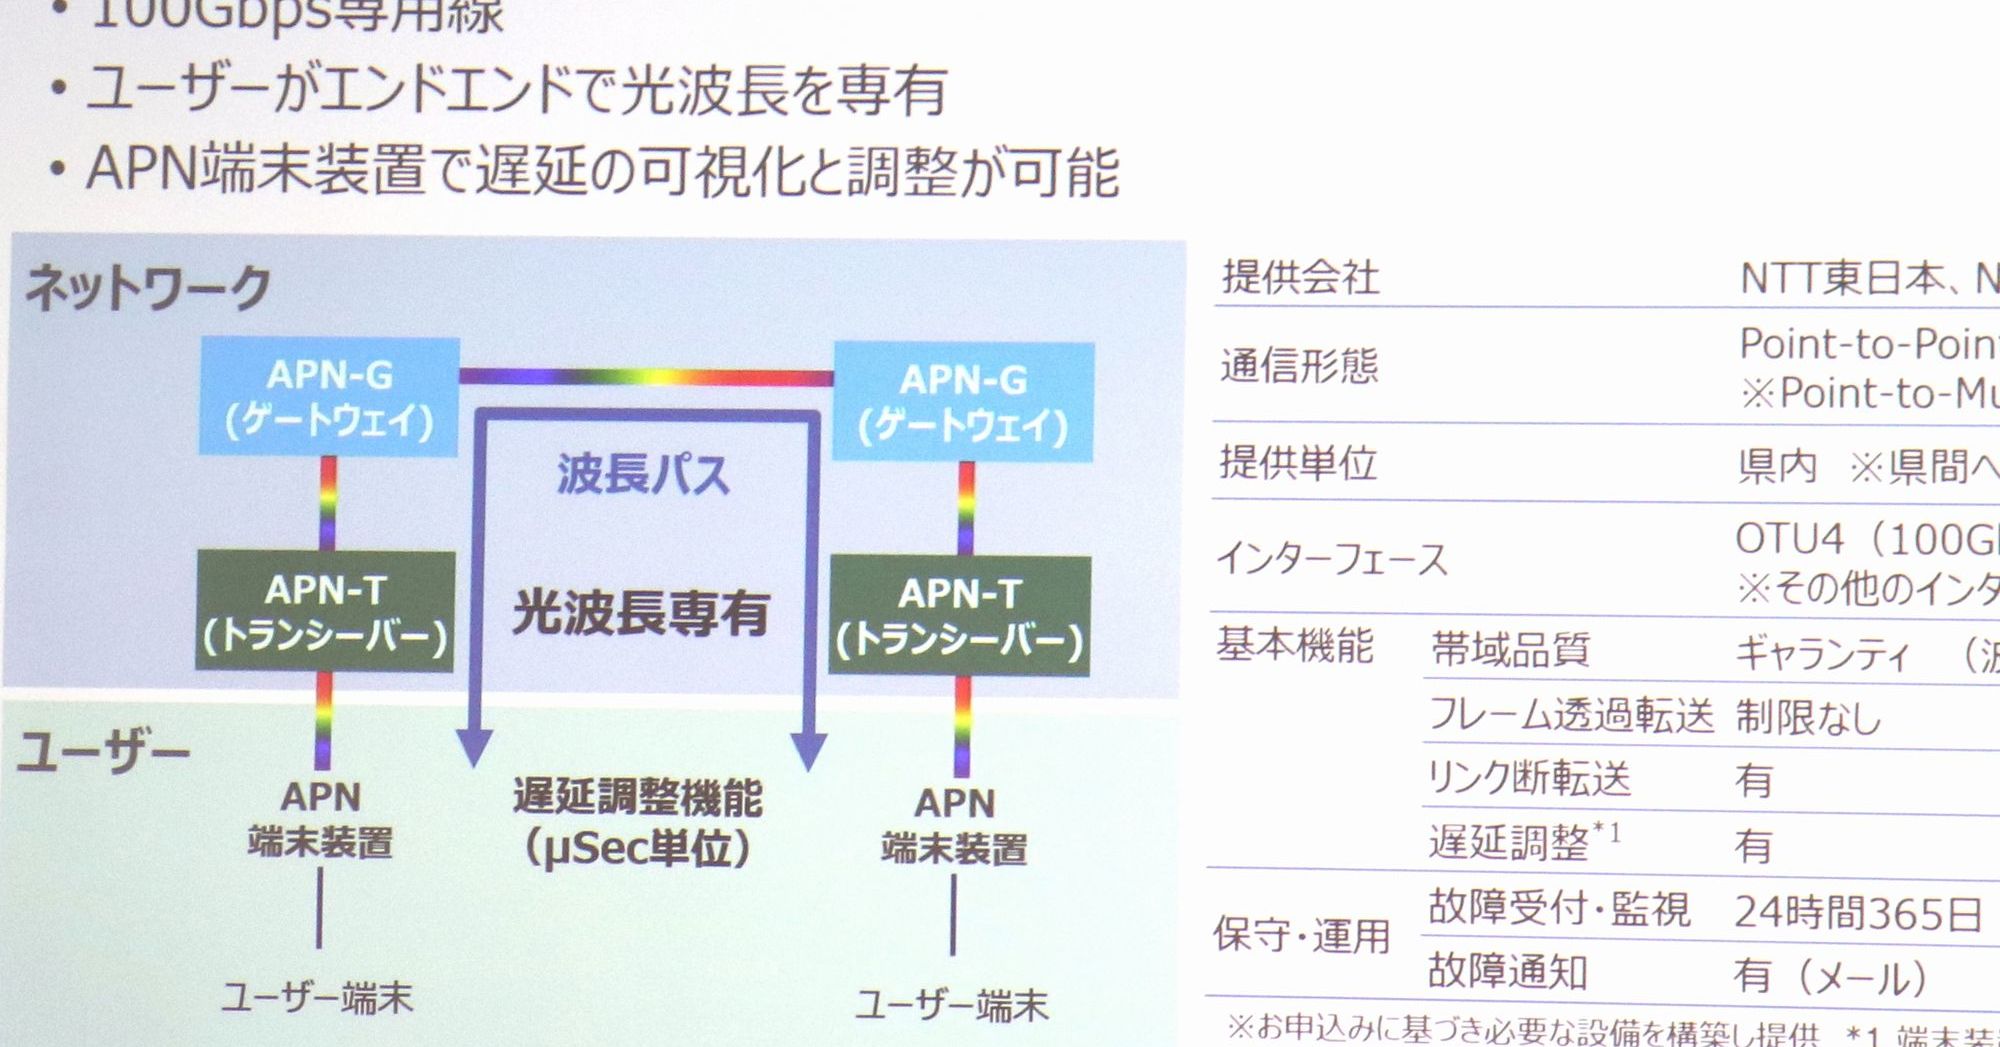 NTT to put IOWN's first service into practical use, realizing low-latency communication of 1/200 compared to conventional optical lines